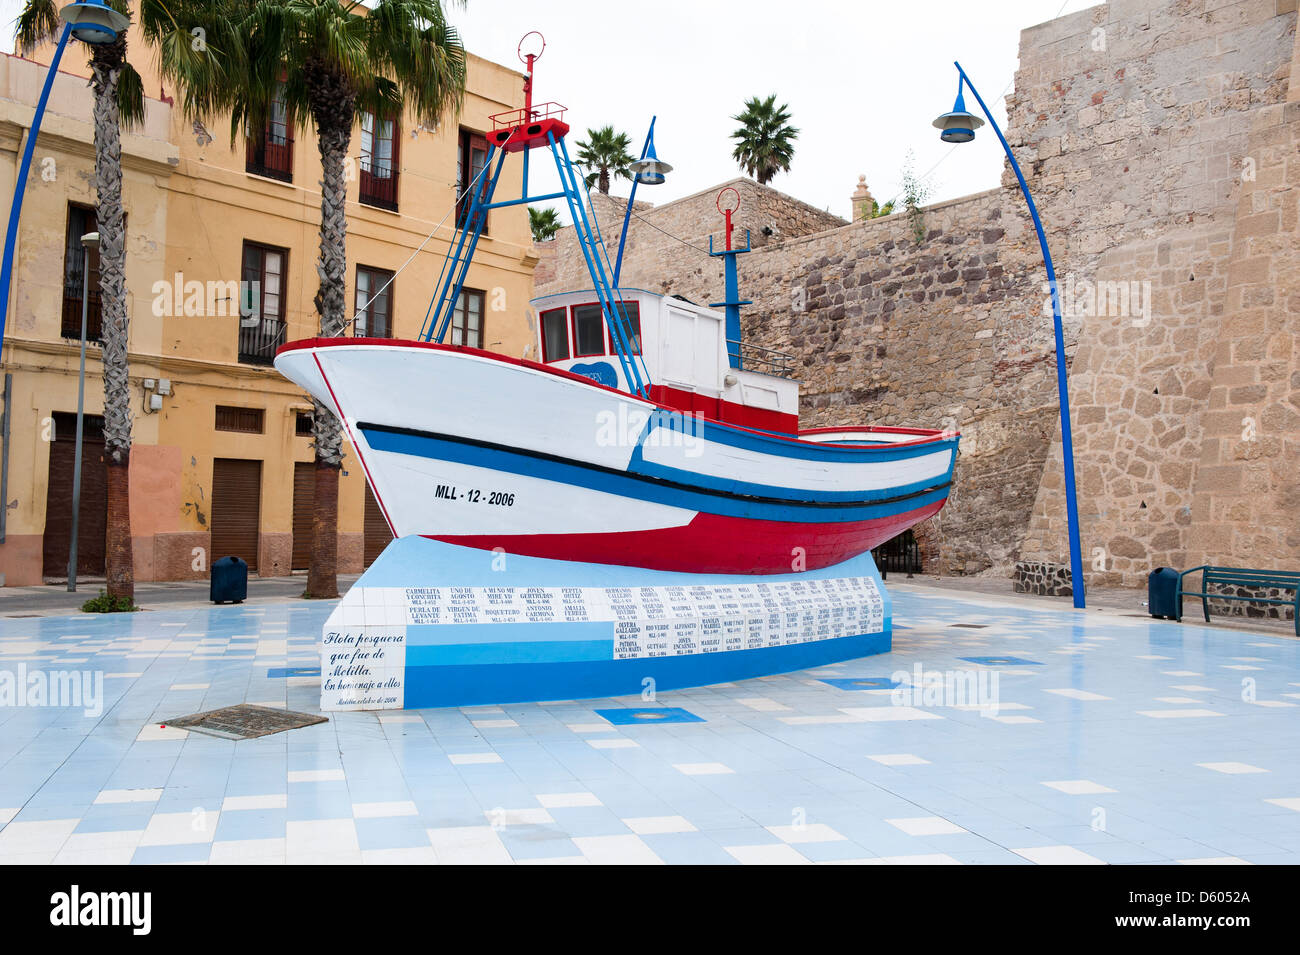 Monument to the fishermen died at sea, Melilla, Spain Stock Photo